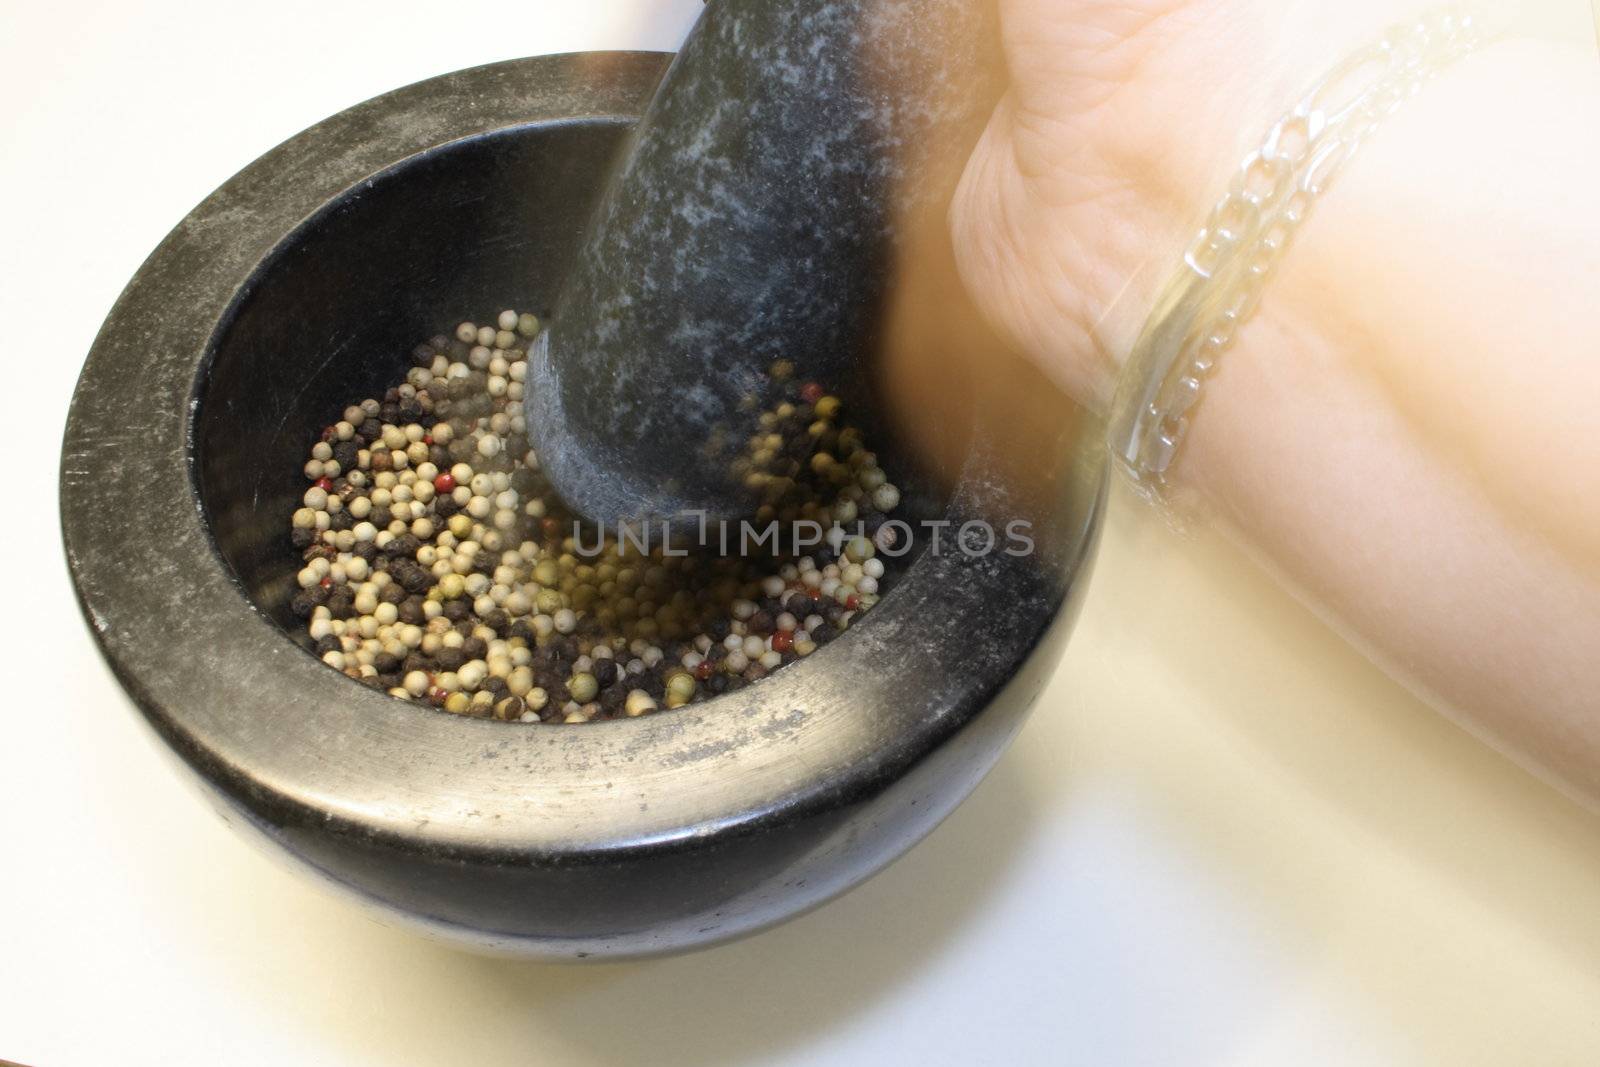 grinding peppercorns in a black granite pestle and mortar bowl showing the movement of the hand as it grinds the corns